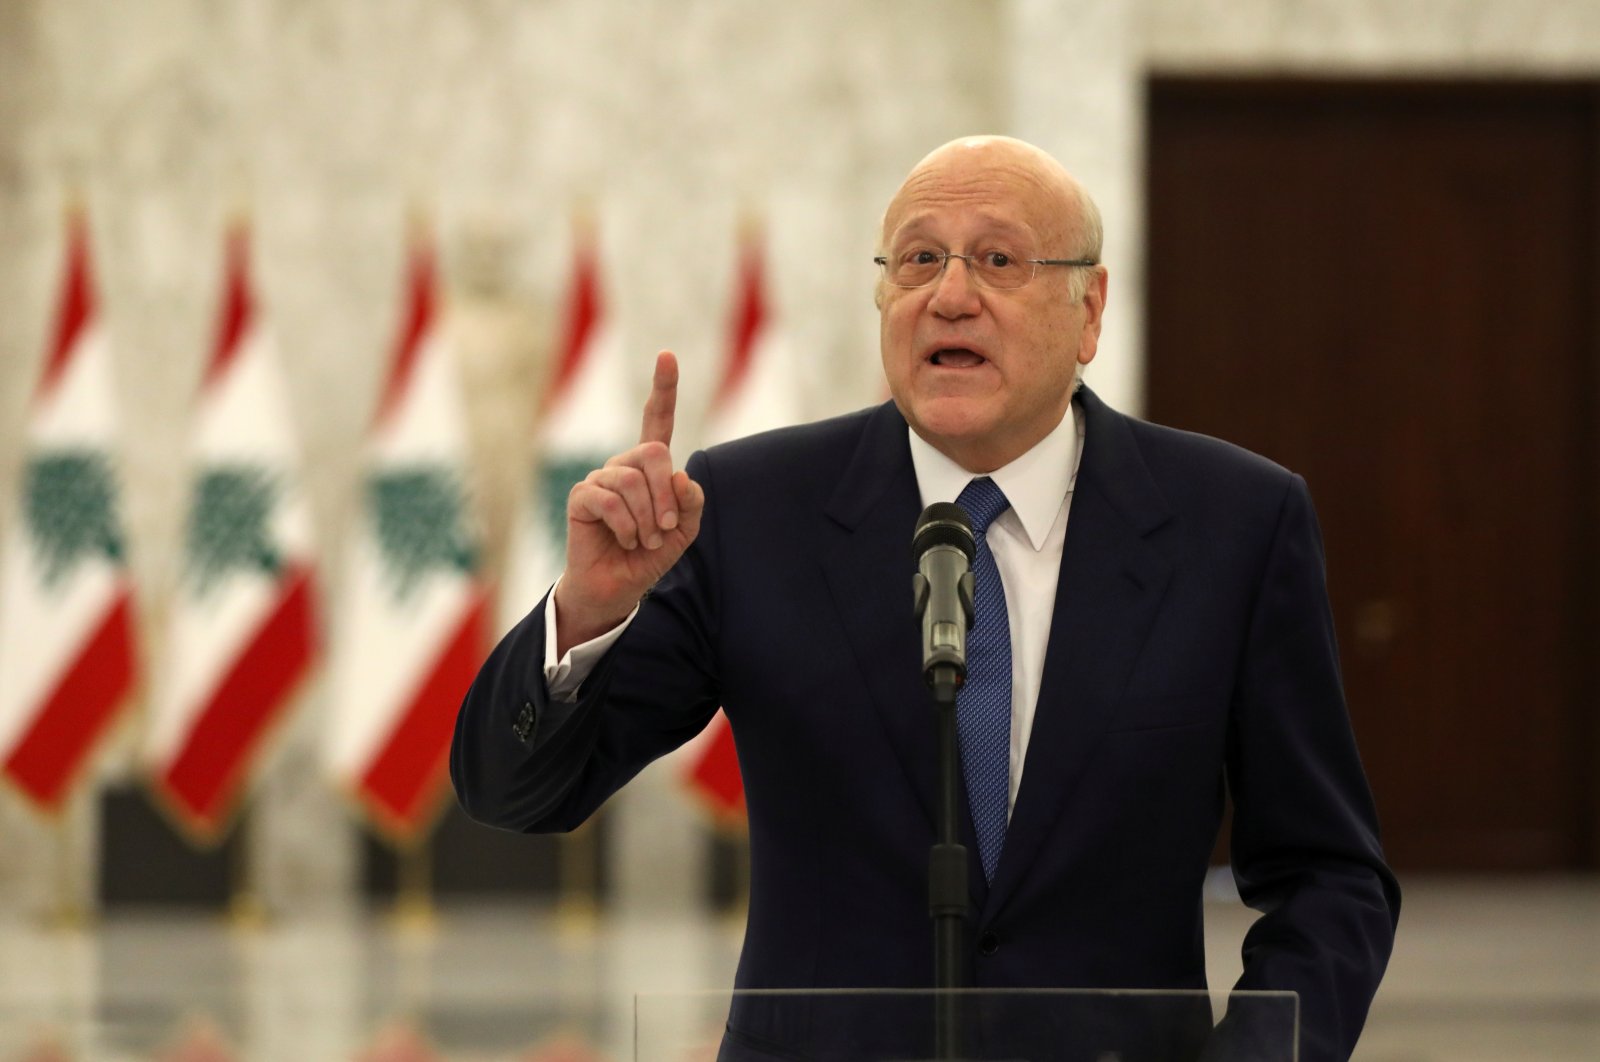 Lebanon's Prime Minister Najib Mikati gestures as he speaks to the press after meeting with President Michel Aoun at the presidential palace in Baabda, Lebanon, Sept. 10, 2021. (Reuters Photo)